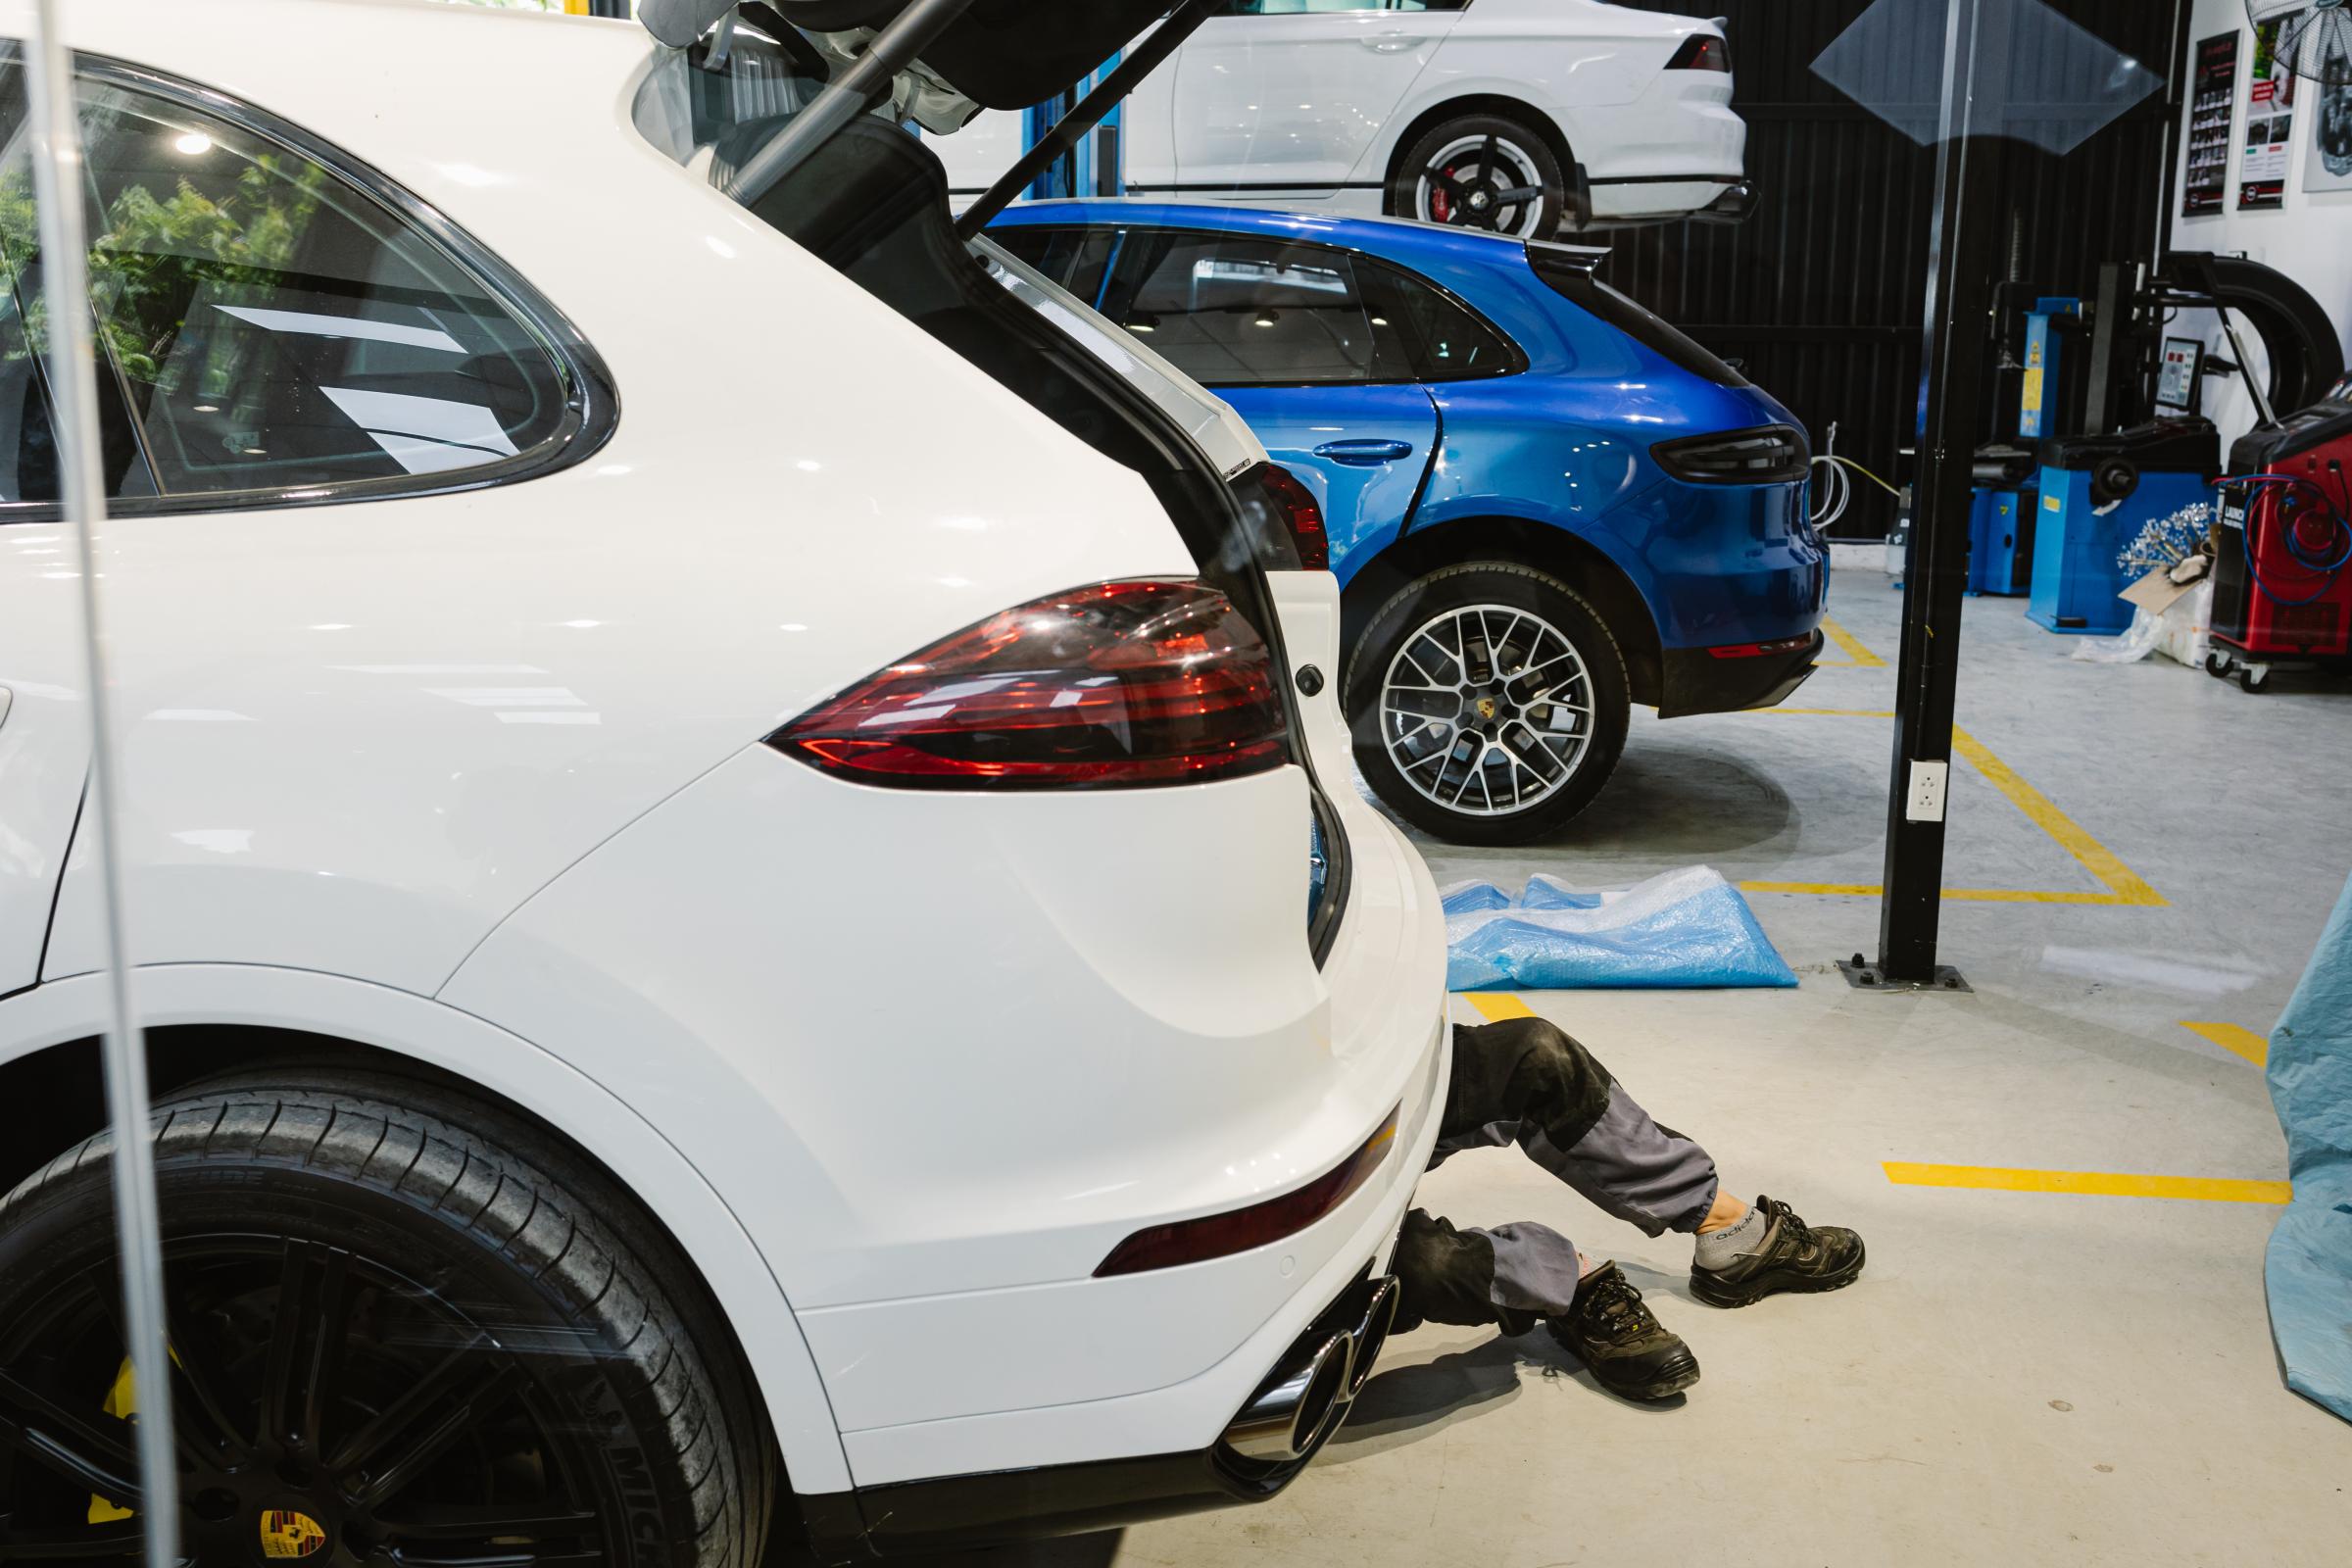 Supercars recharged - A day at a professional car workshop - 